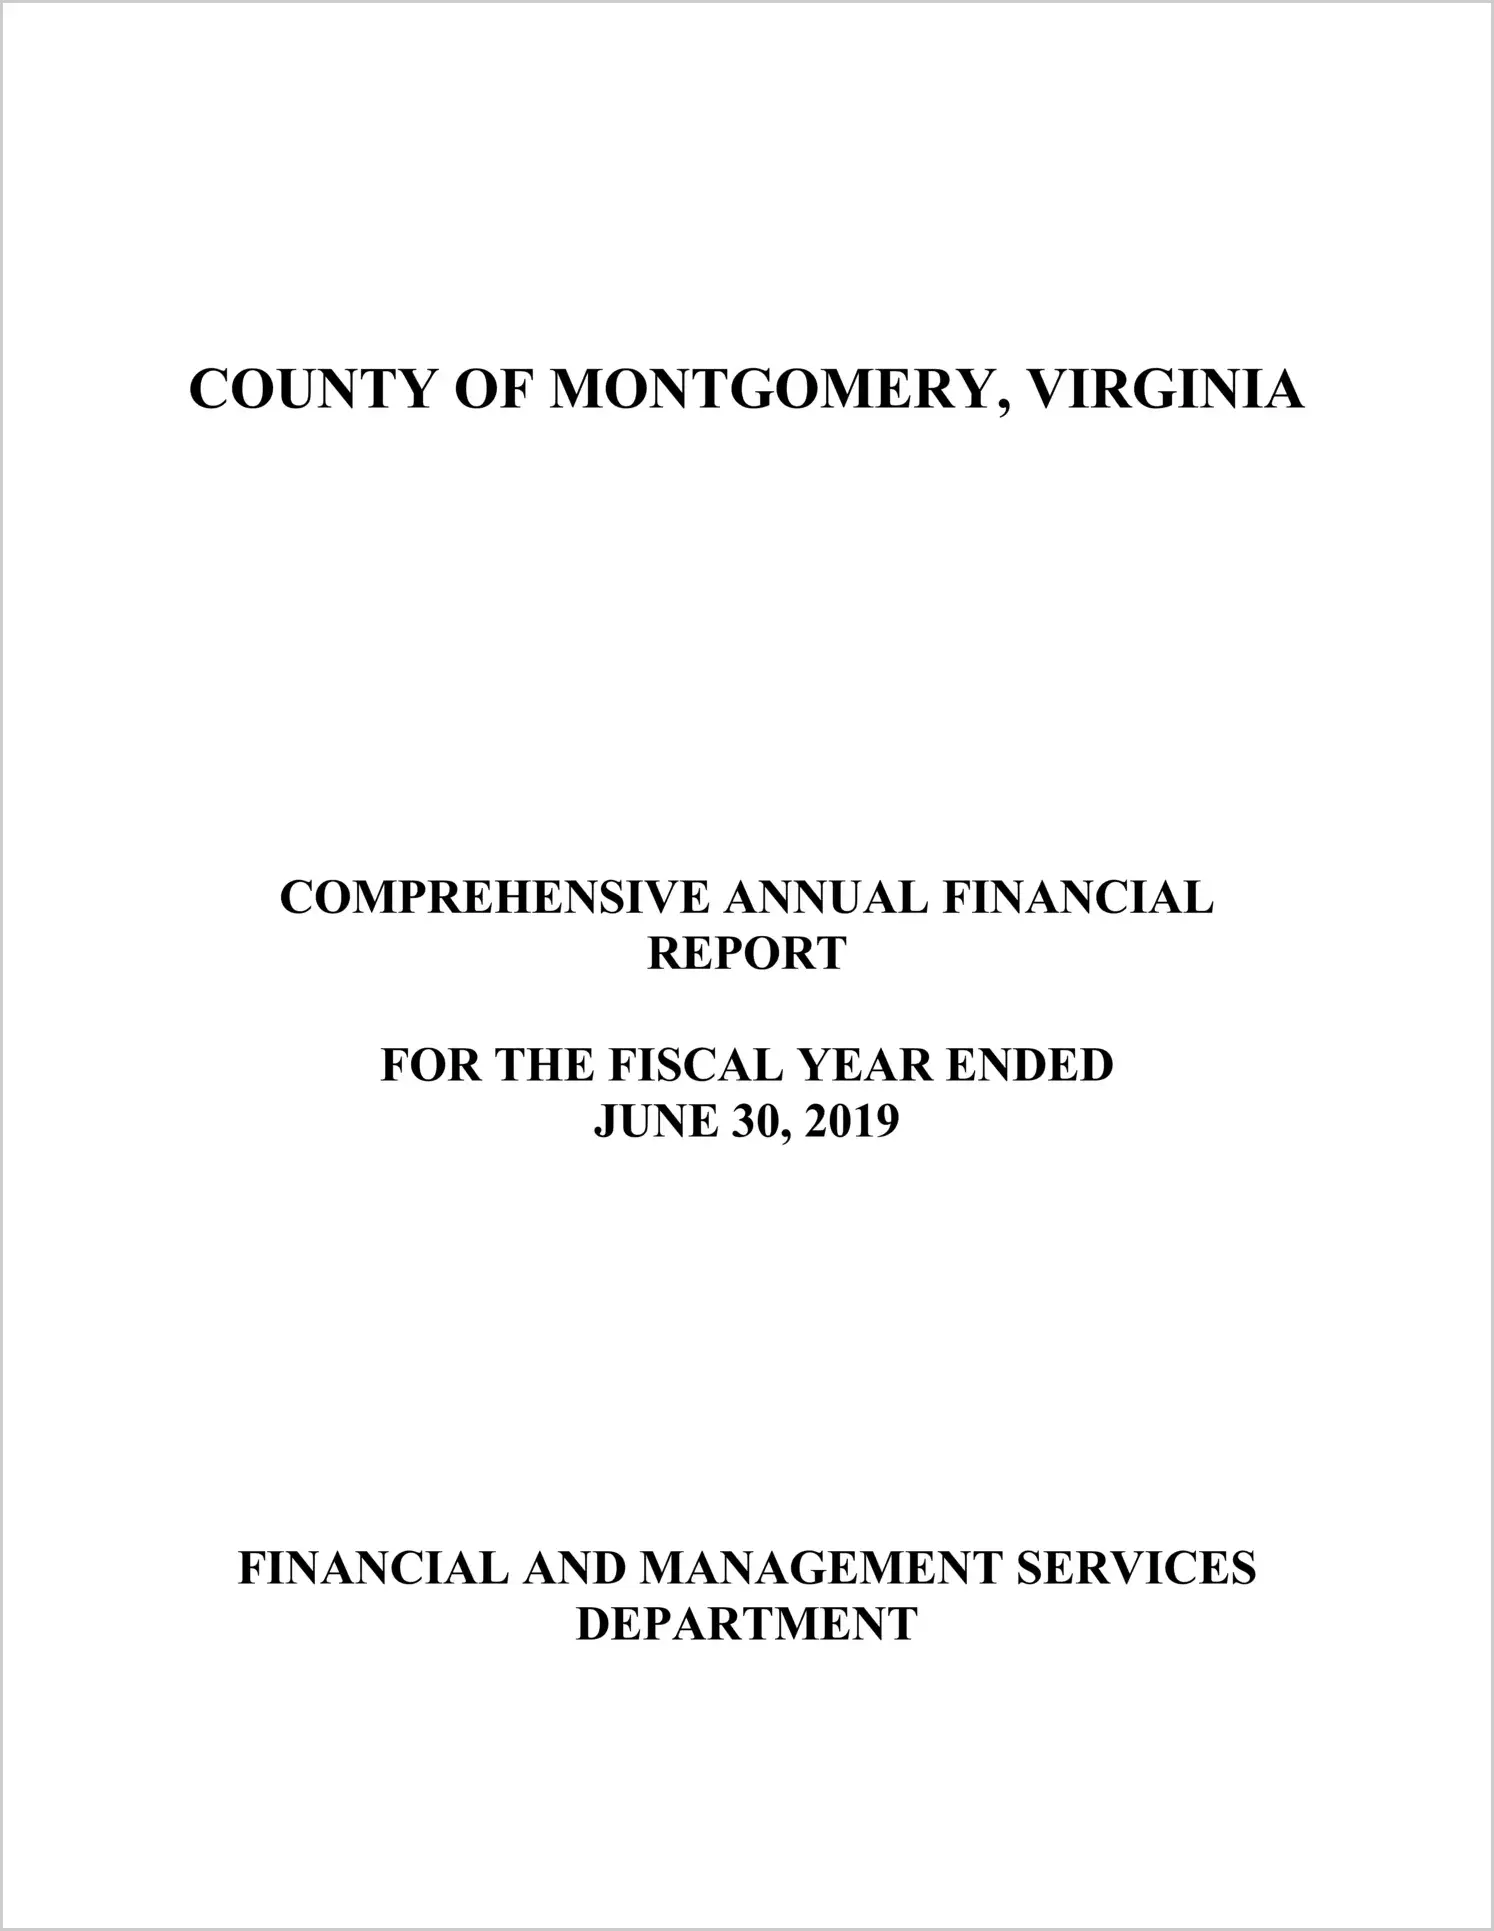 2019 Annual Financial Report for County of Montgomery